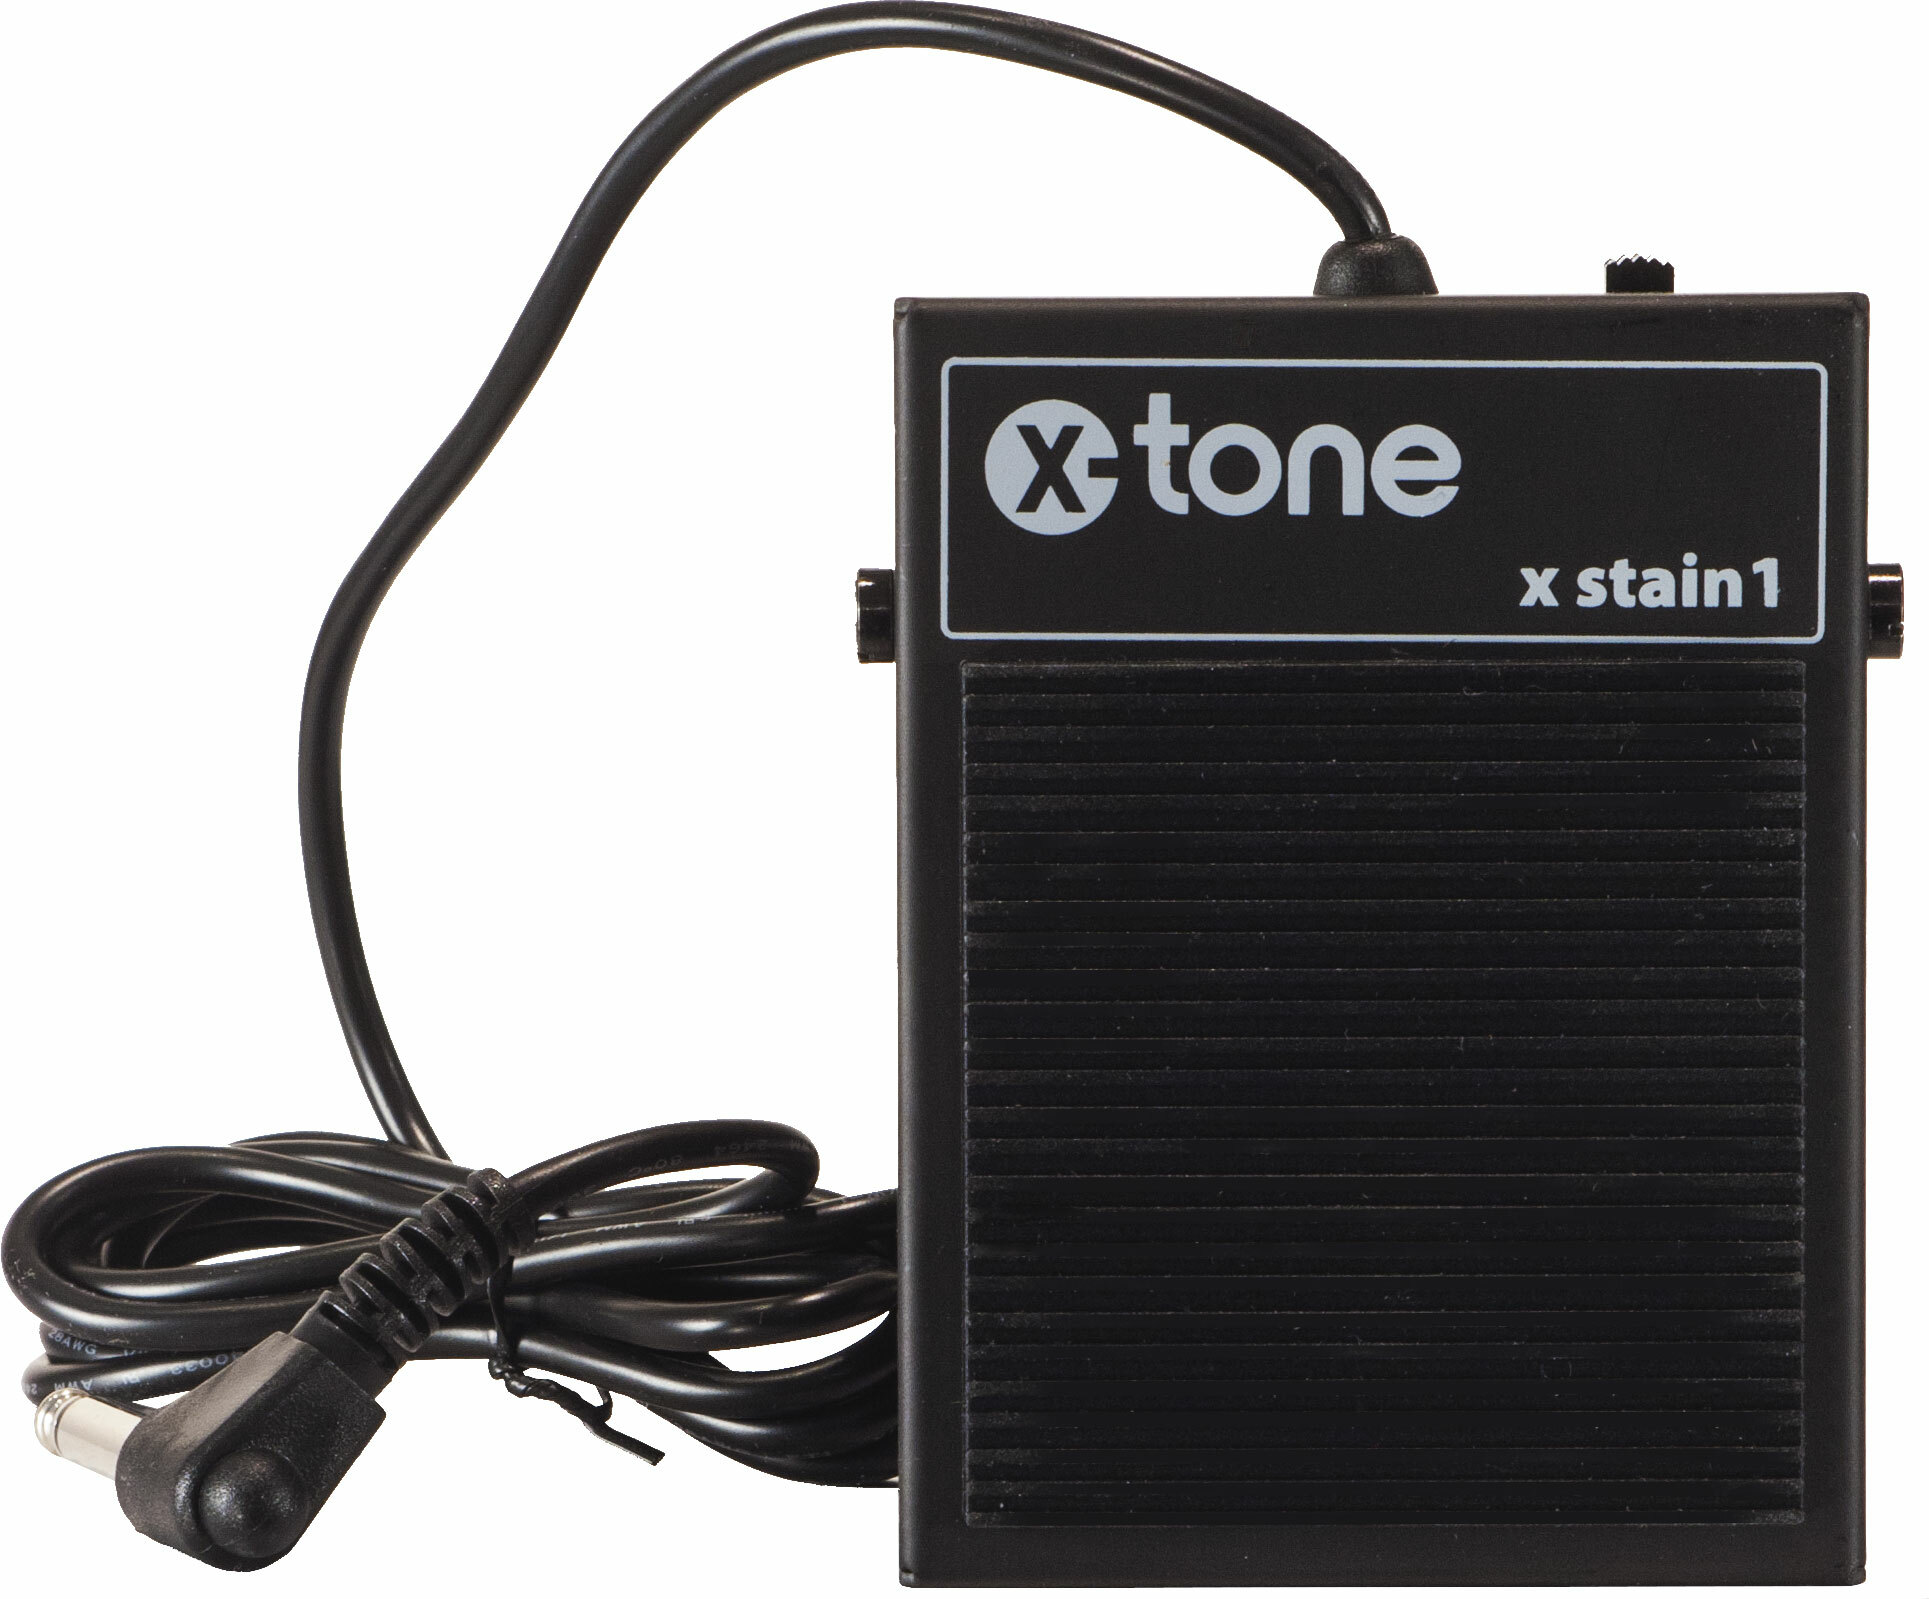 X-tone X-stain 1 Pedale Sustain - Keyboard Sustain-Effektpedal - Main picture